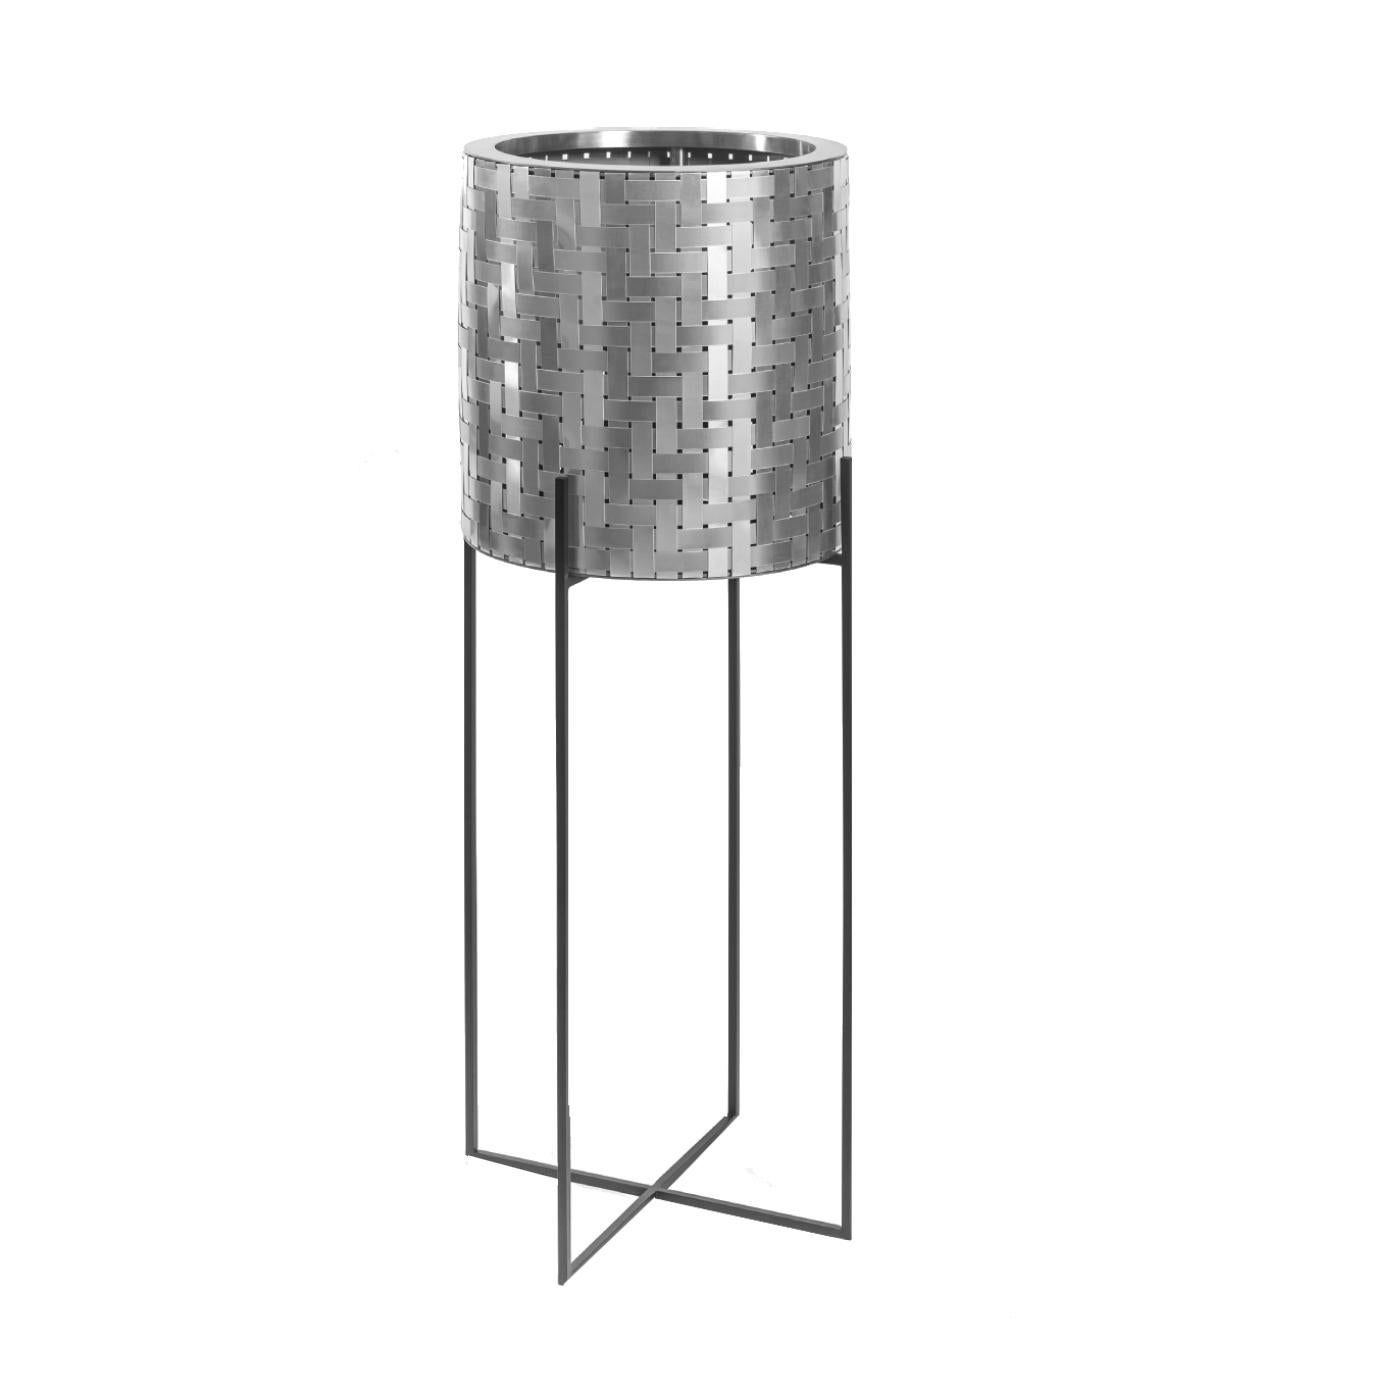 Nexum is a vase cover with an external structure in painted iron, designed to make it easier to care for your plants. Available in three different sizes, the Nexum80 is 80 cm high and sits approximately 70 cm off the ground. The internal steel